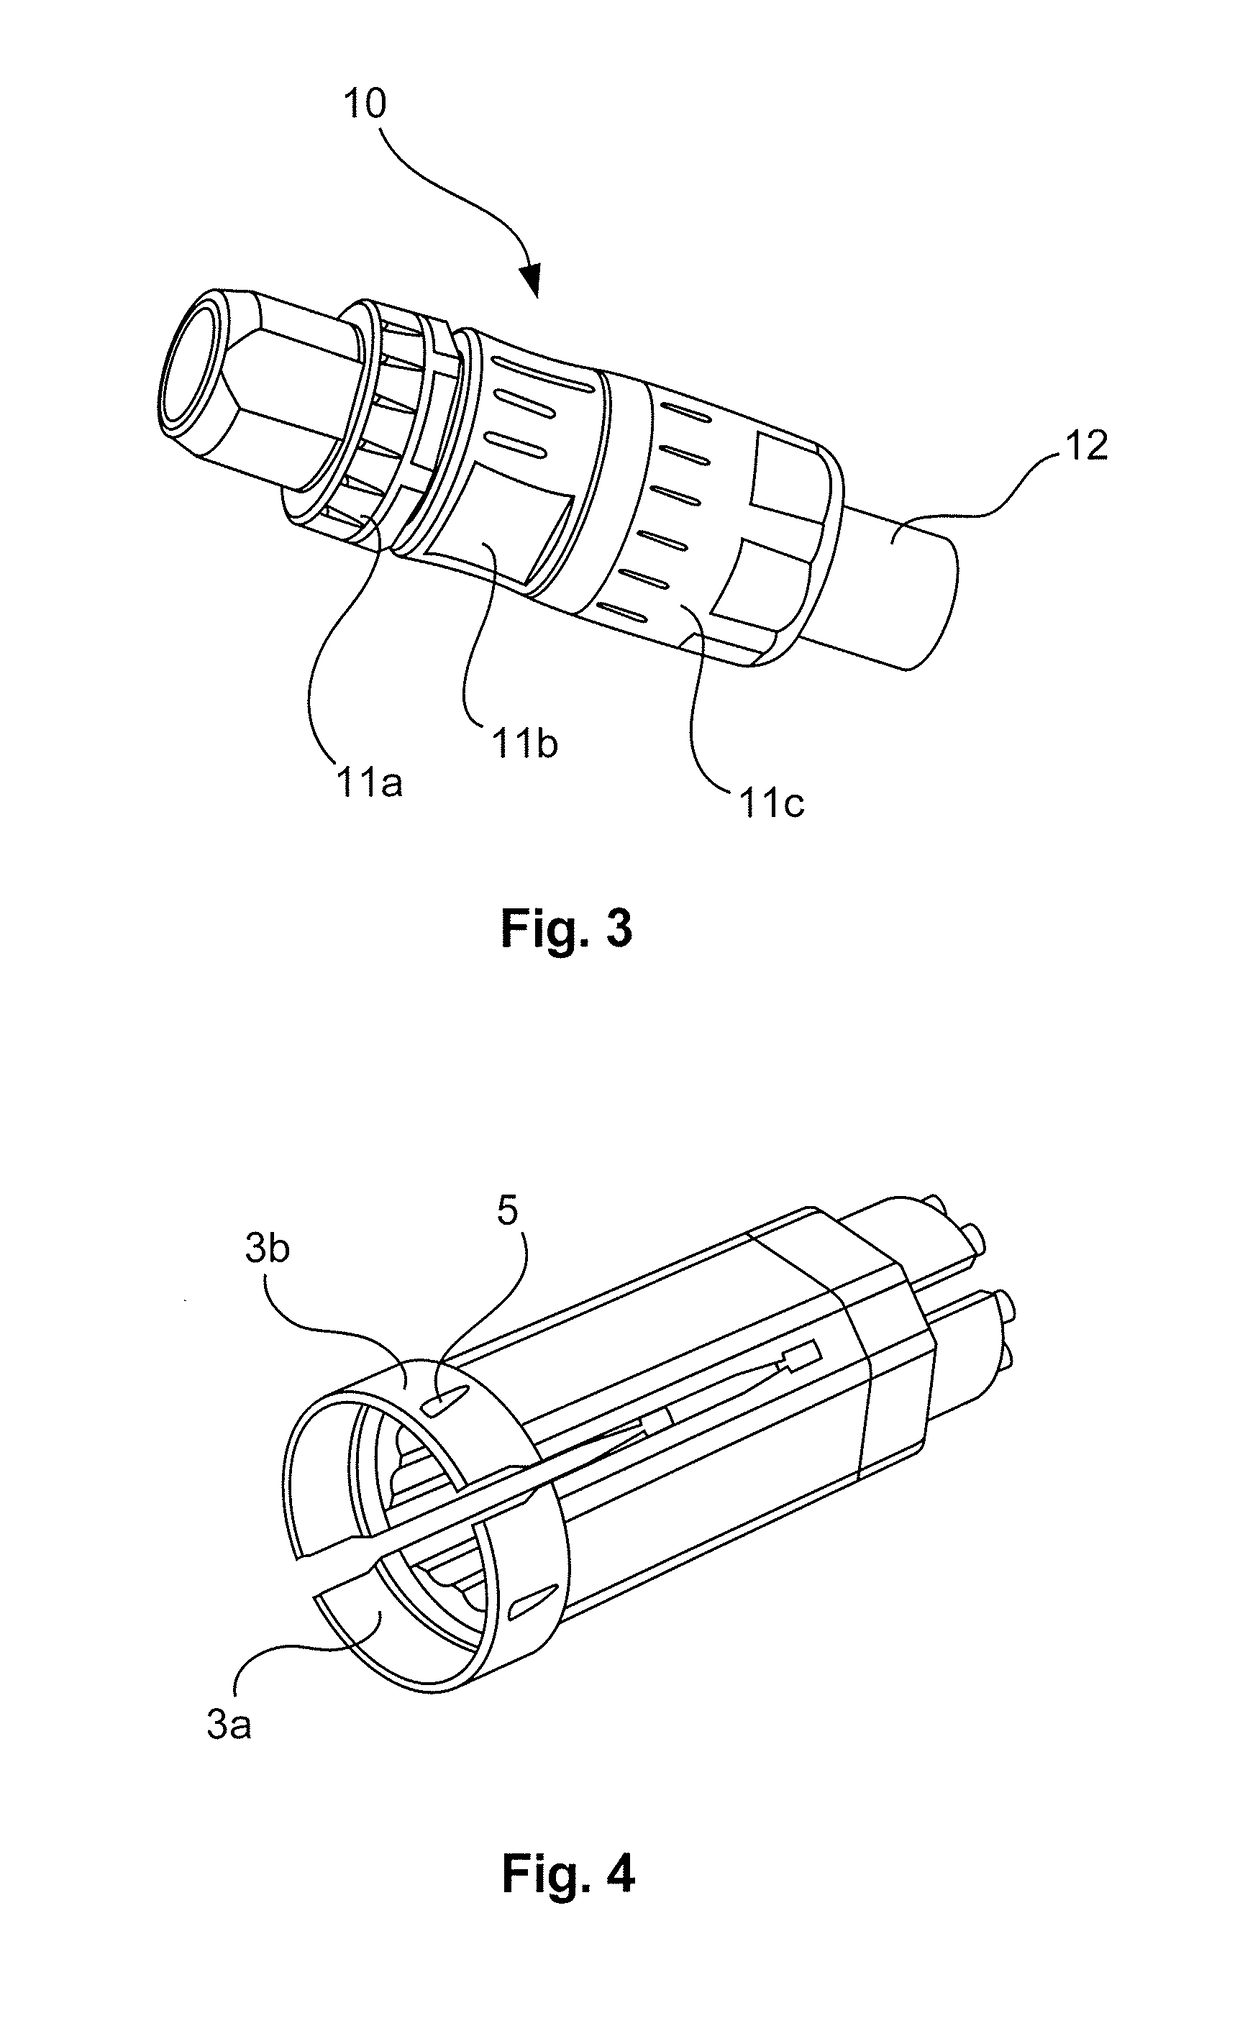 Insulation insert with an integrated shielding element